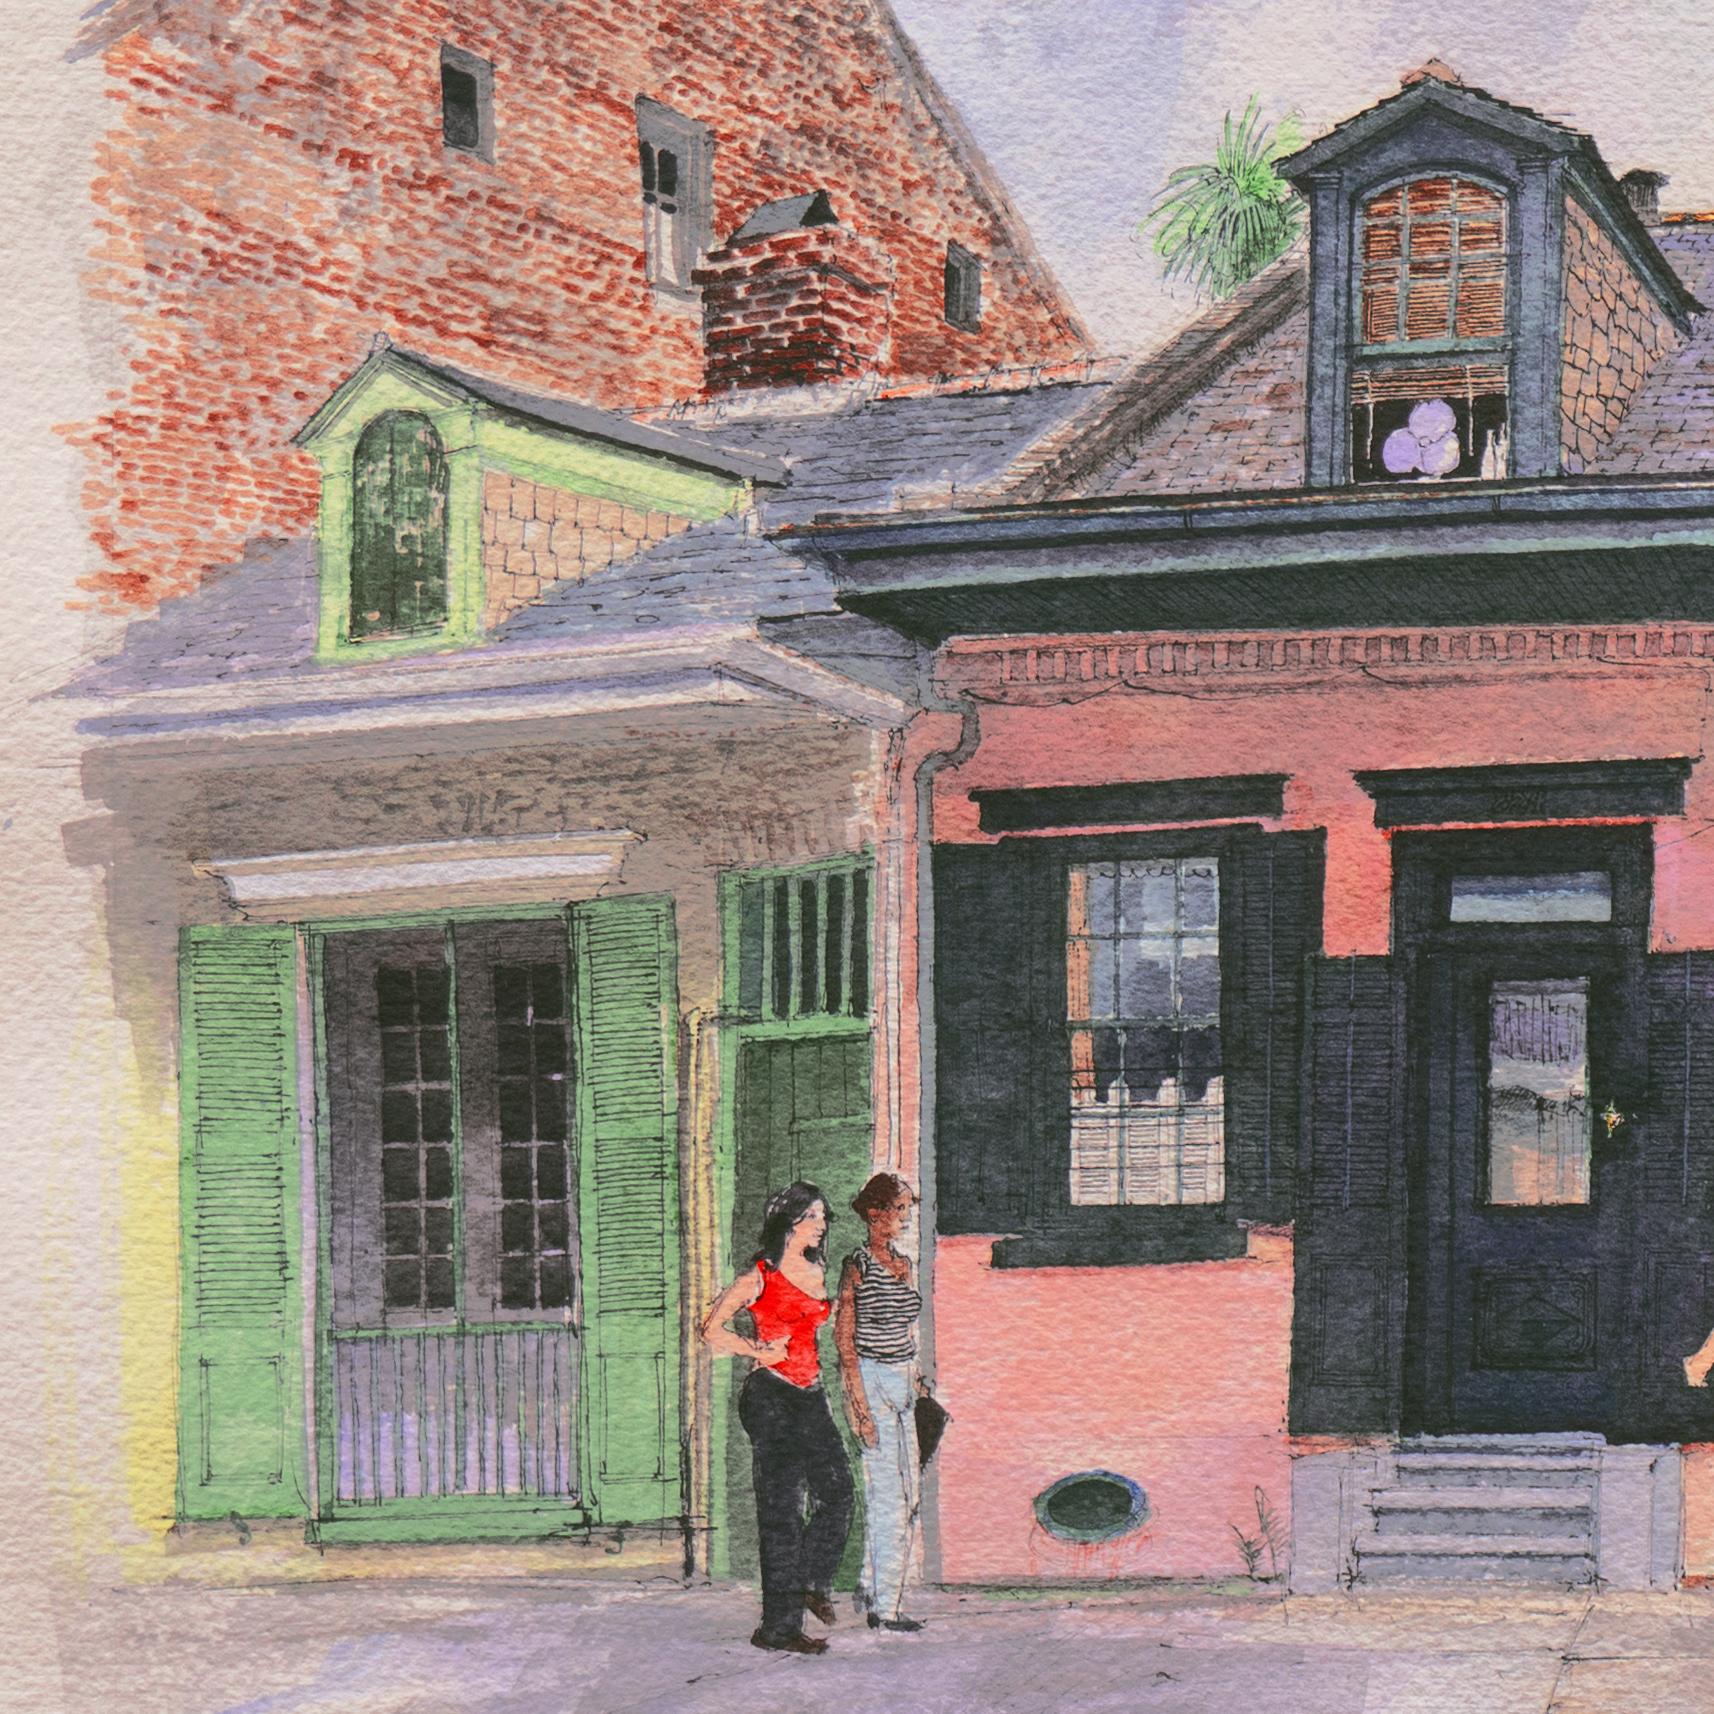 Signed lower right, 'Tommy G Thompson' (American, born 1948), titled, 'Shadows on a Shrimp Pink House, 822 & 824 Bourbon St. New Orleans' and dated 1977. A fine and original watercolor by this legendary painter of the New Orleans jazz scene and